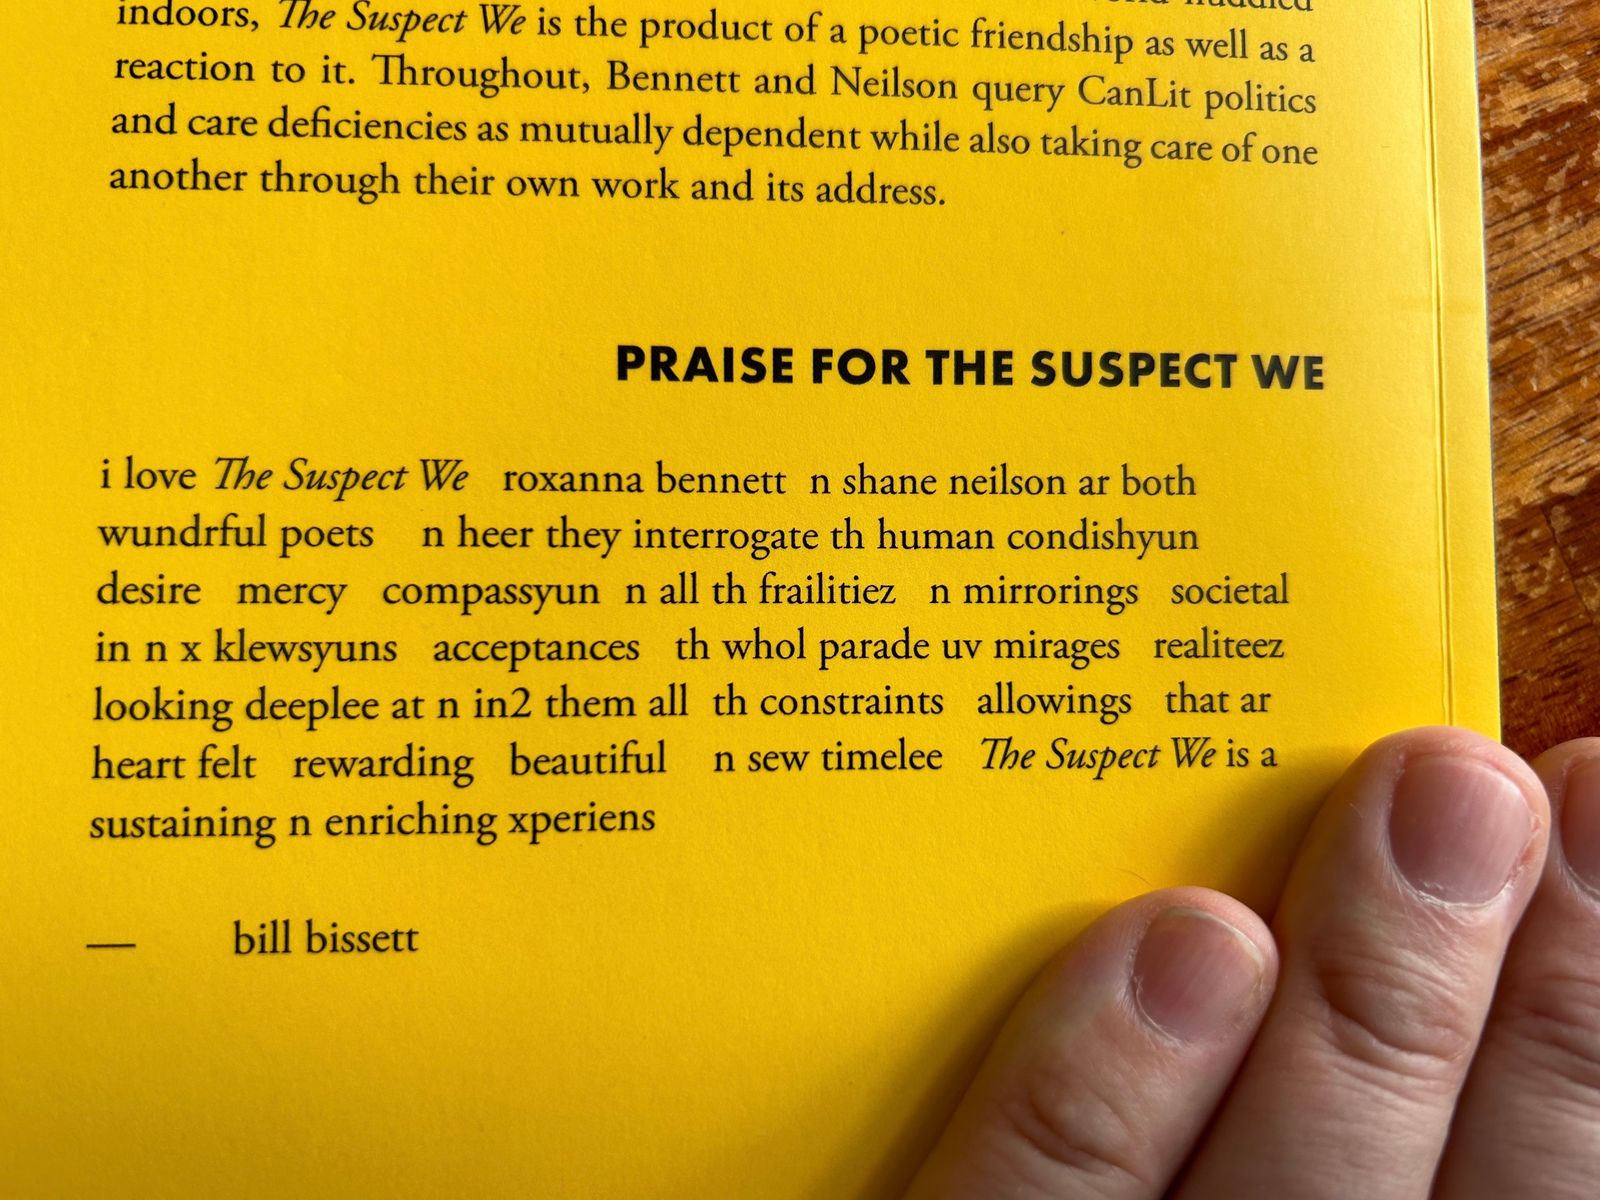 A testimonial from bill bisset printed on the back of The Suspect We.